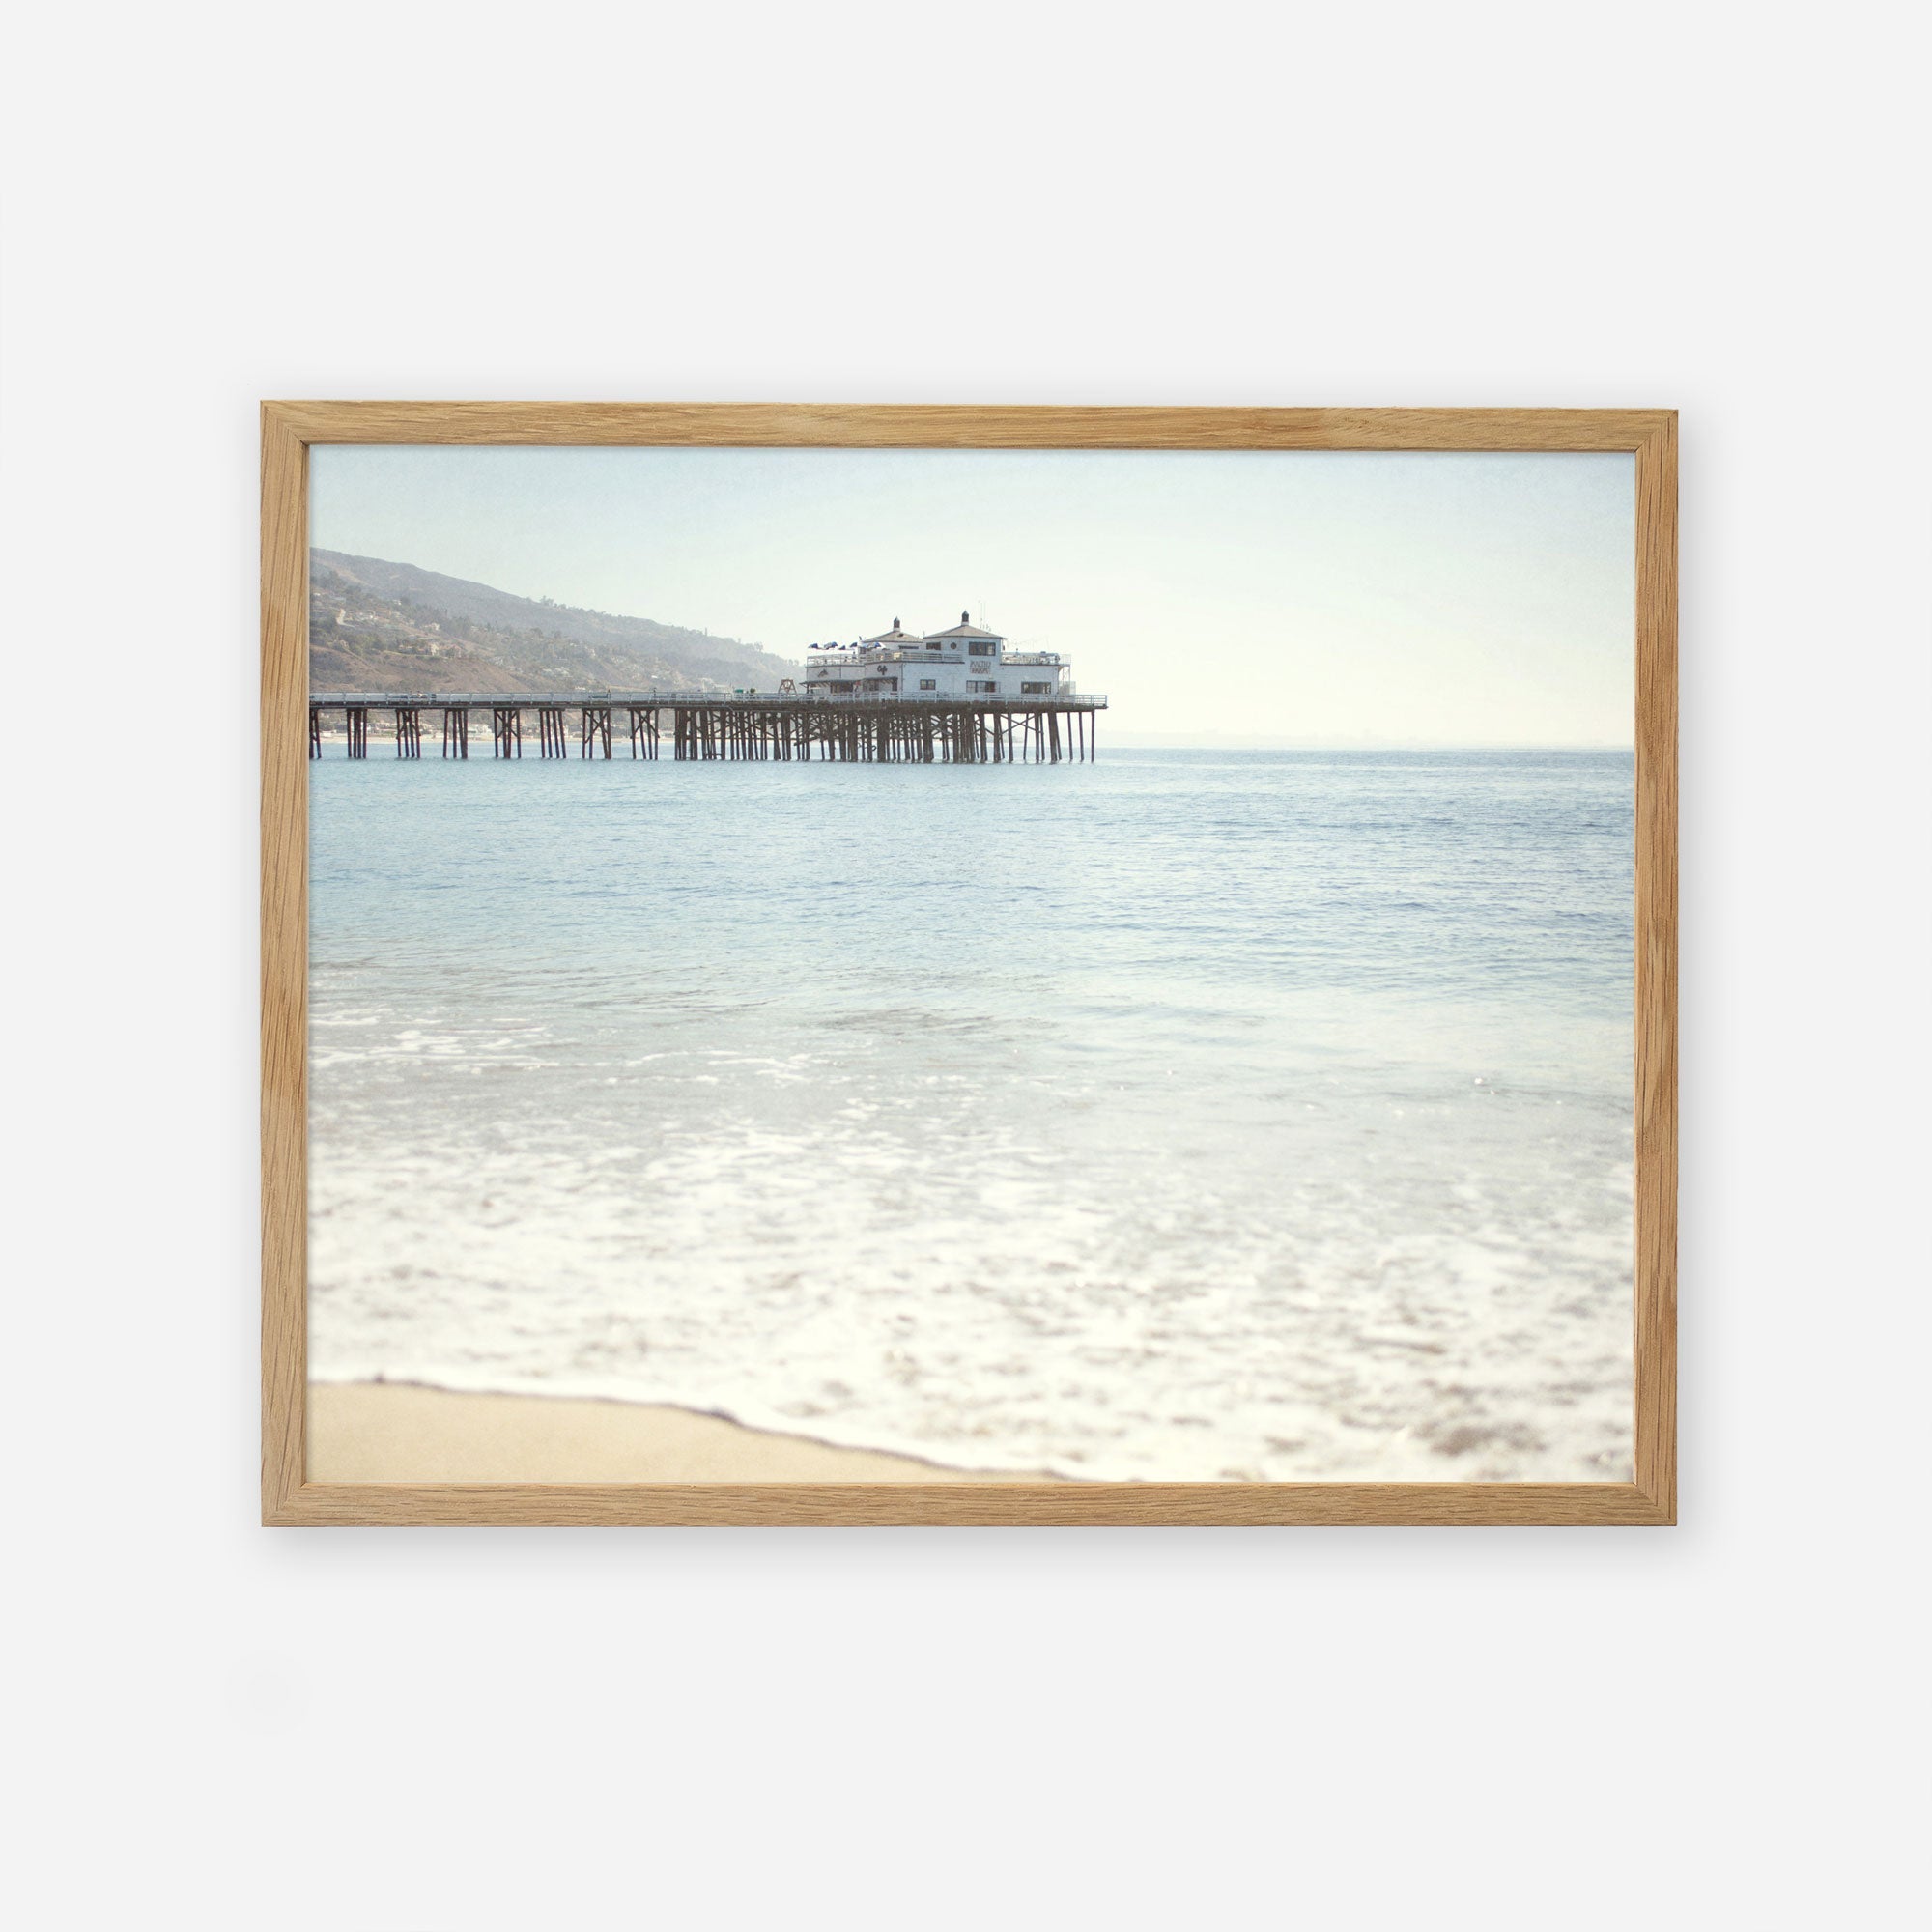 A framed photograph of a tranquil beach scene with gentle waves lapping at the shore and &#39;Malibu Pier&#39; extending into the ocean, supporting a large building under a clear sky. This is the Offley Green California Beach Print.